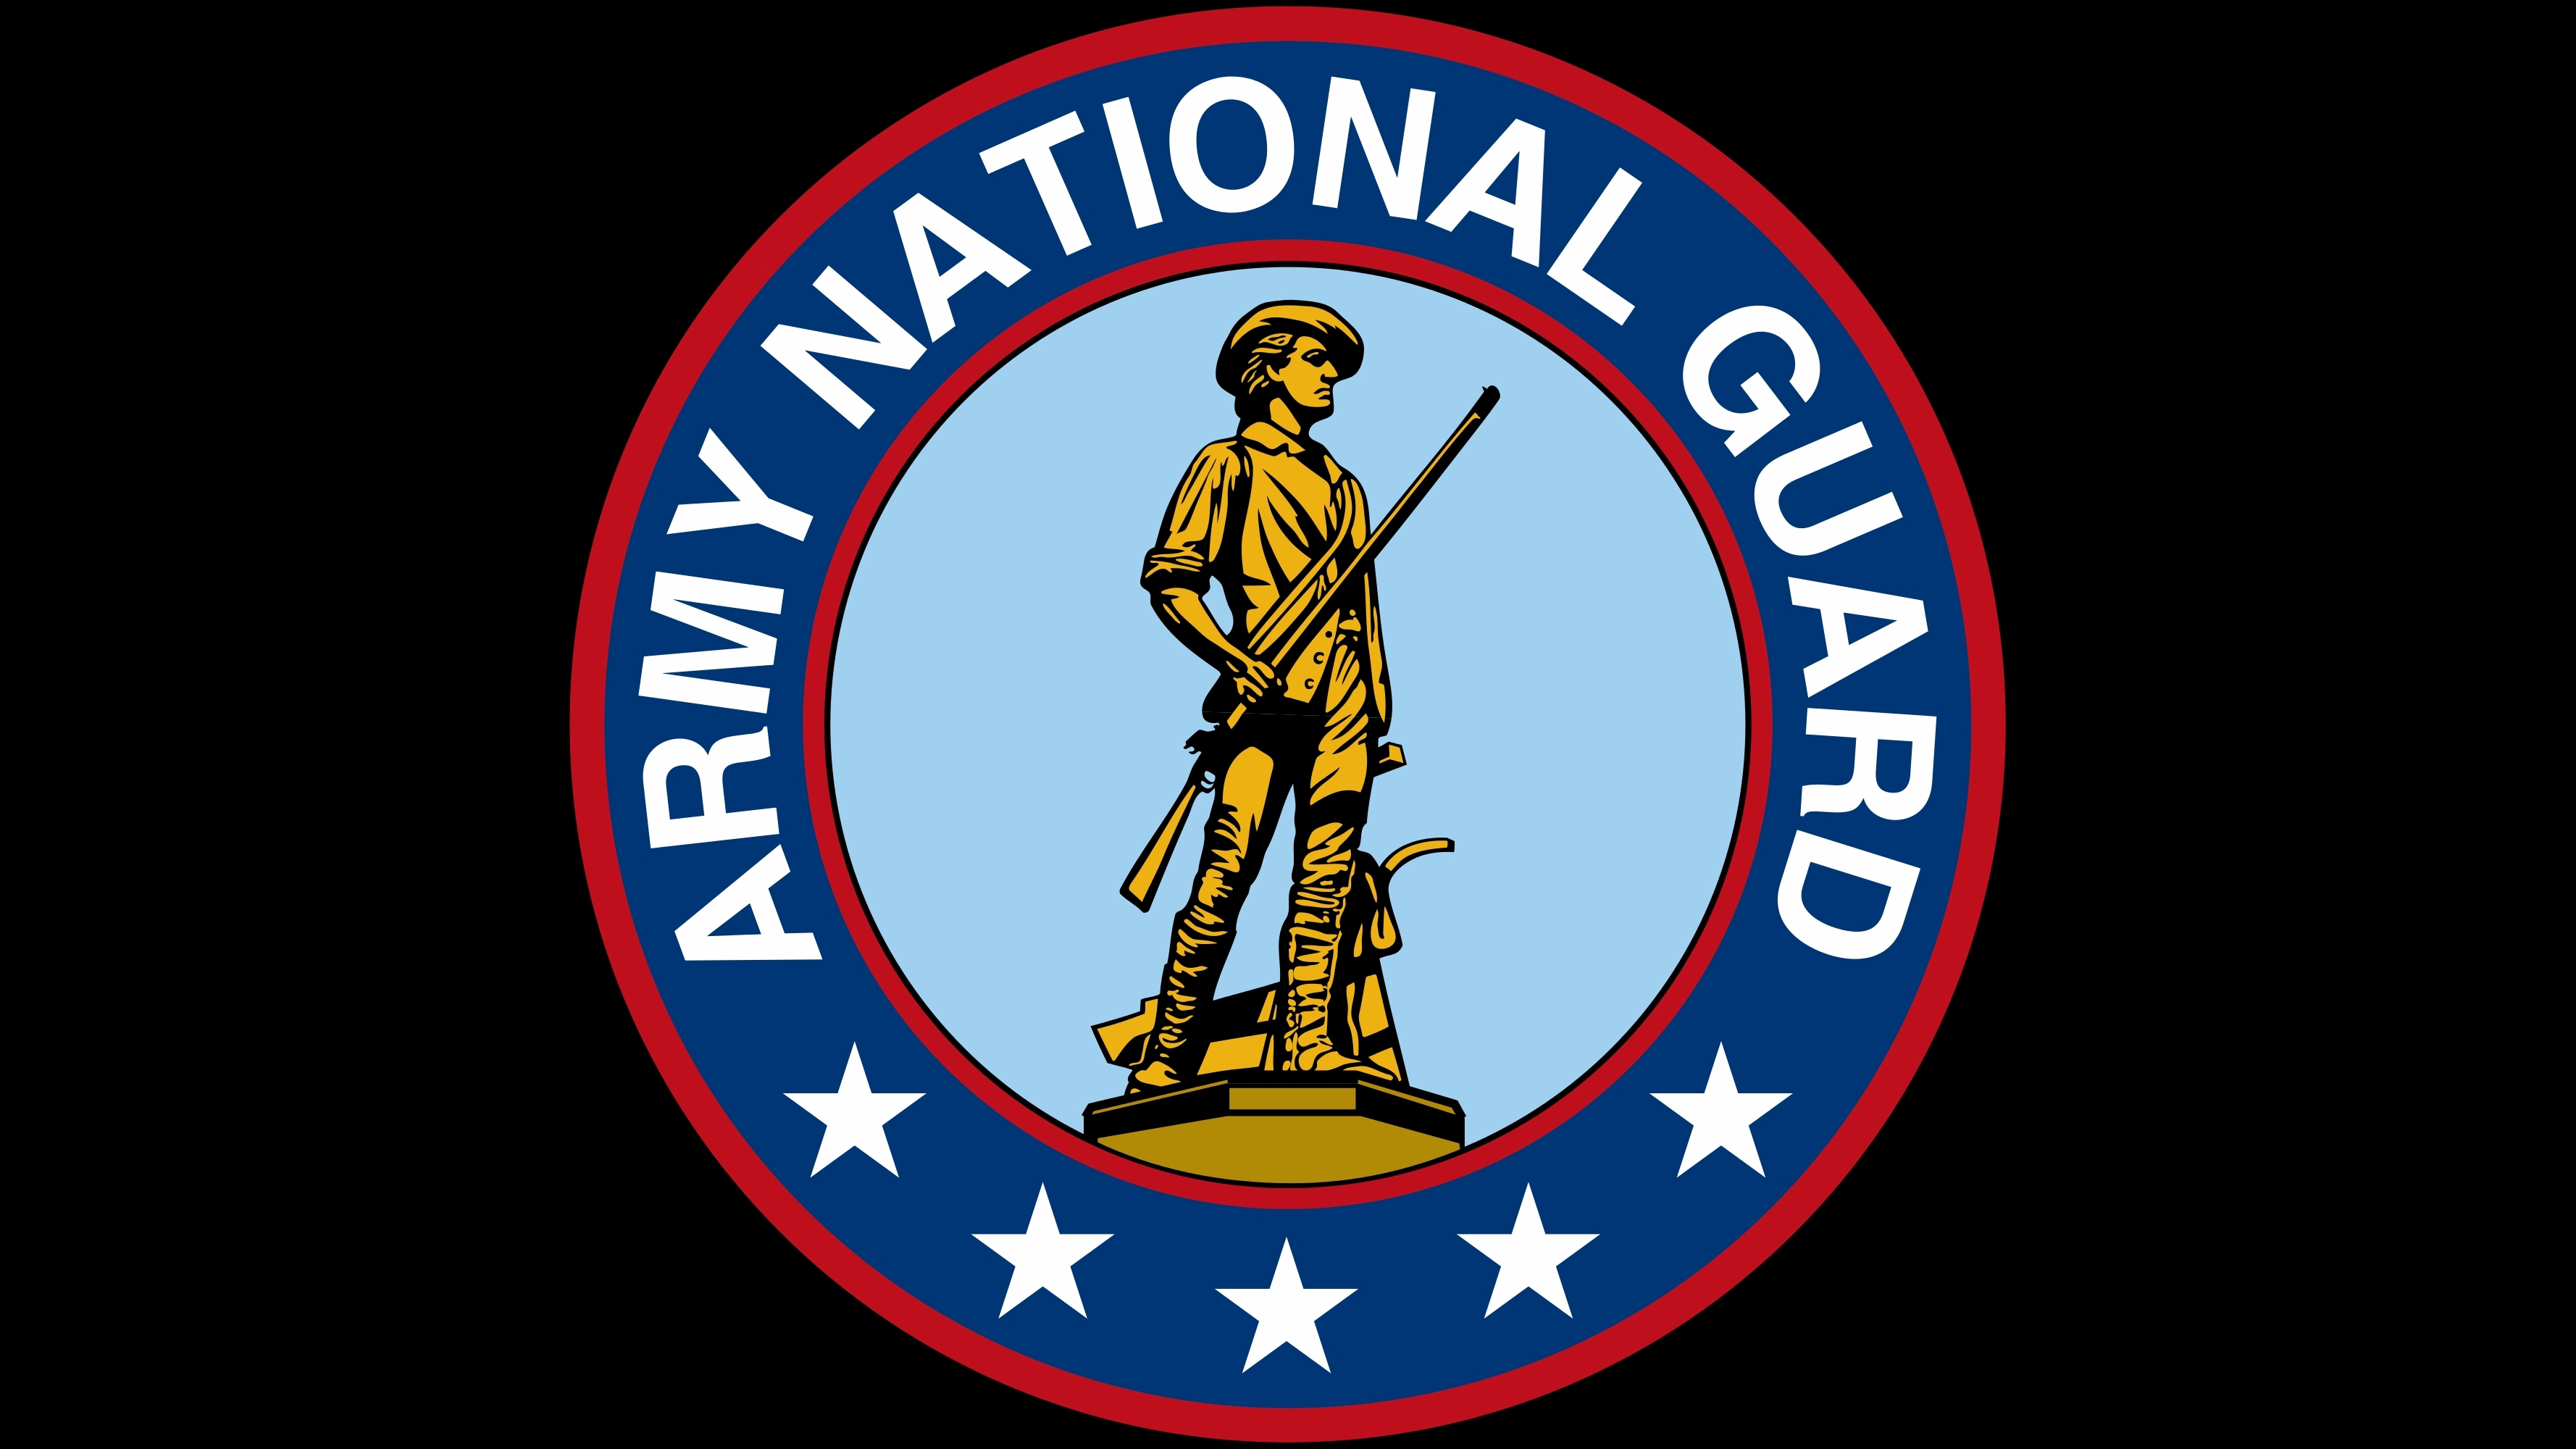 National Guard HD Wallpaper | Background Image | 3556x2000 | ID:658571